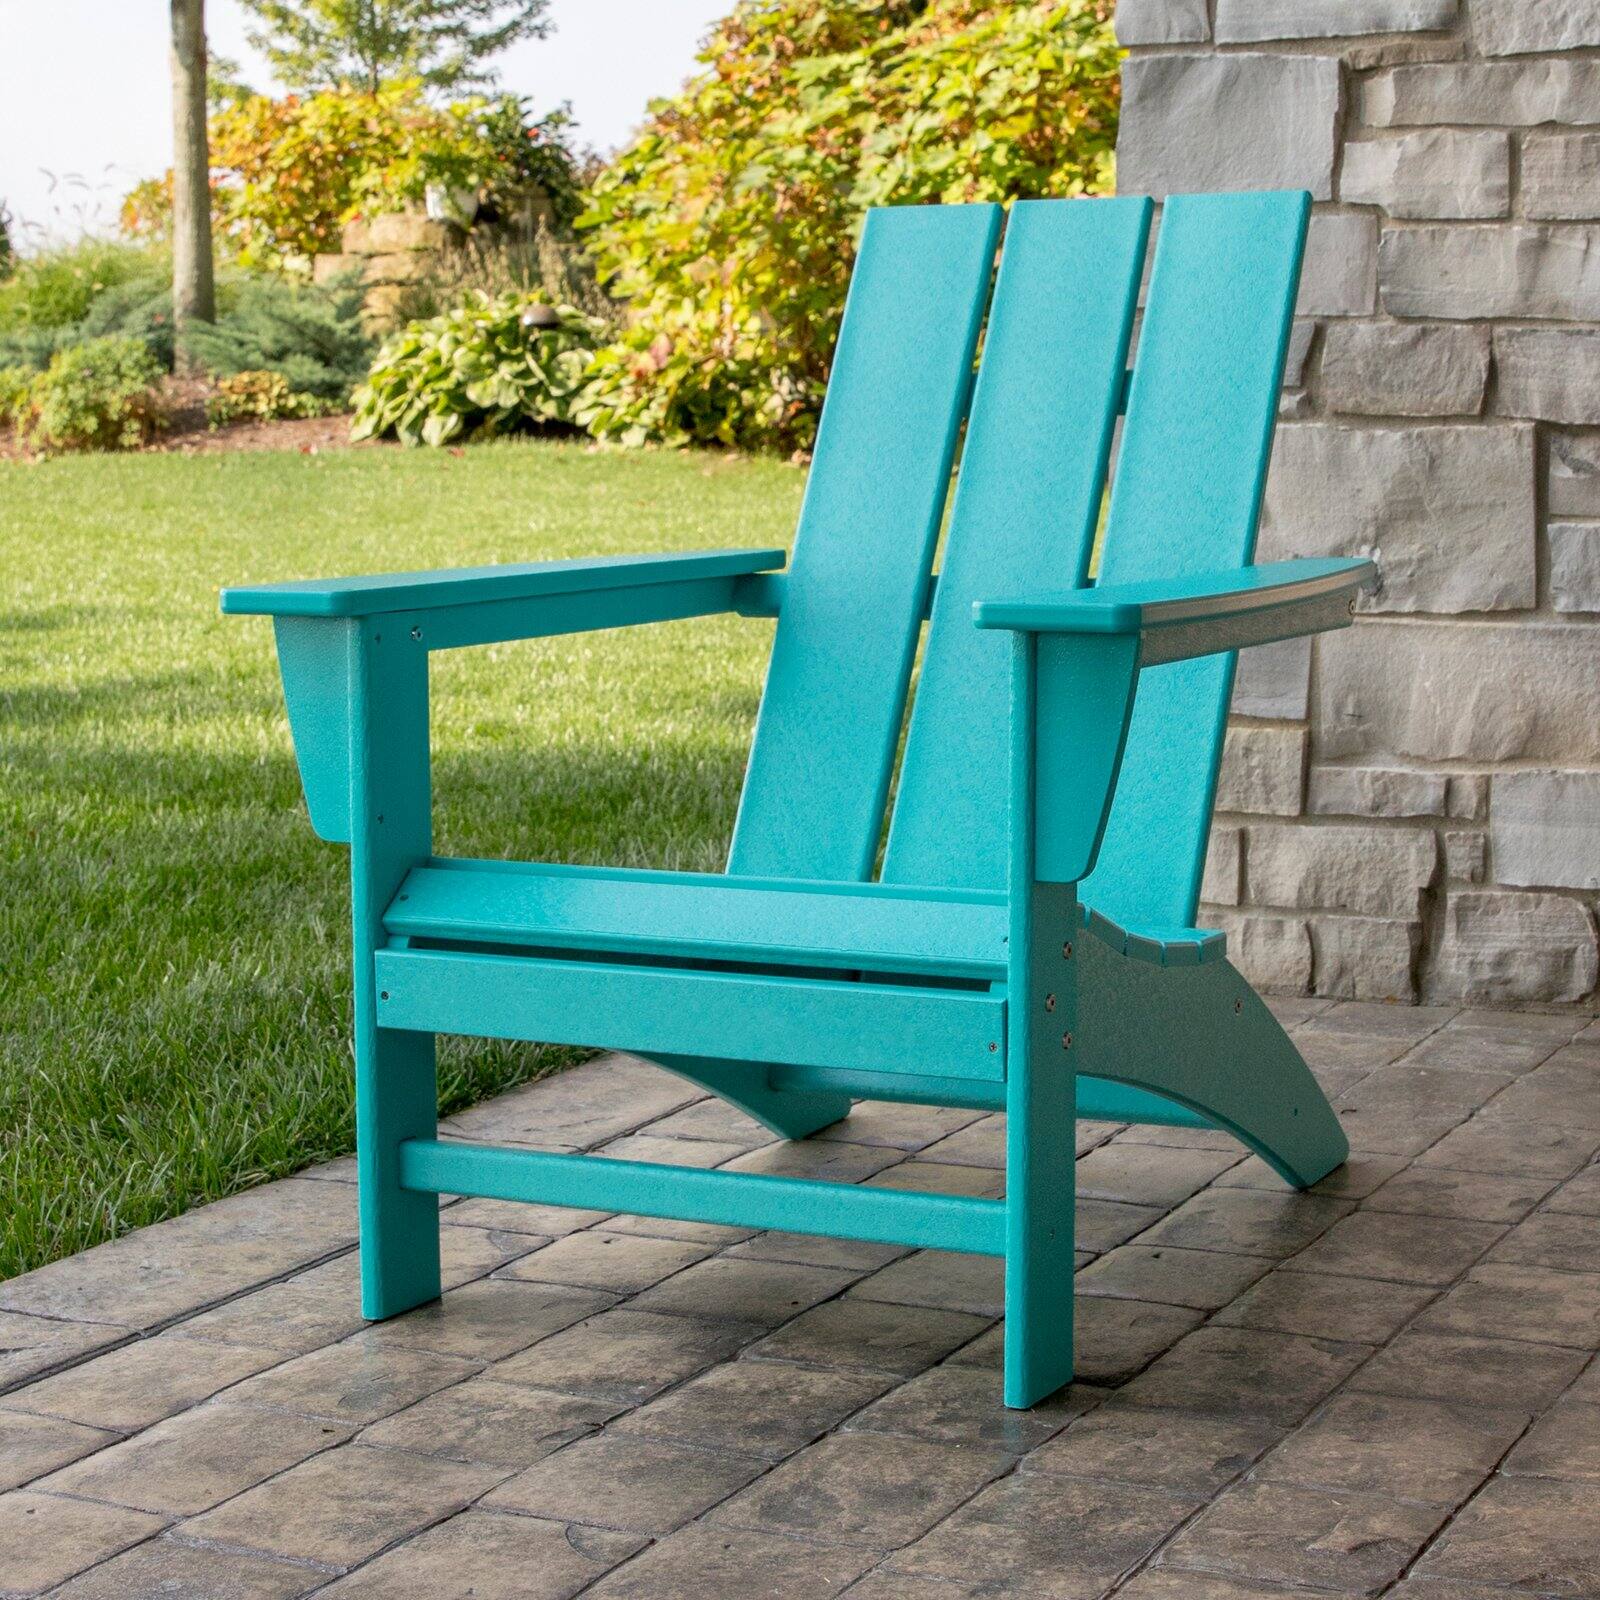 POLYWOODÂ® Modern Outdoor Adirondack Chair - image 3 of 4